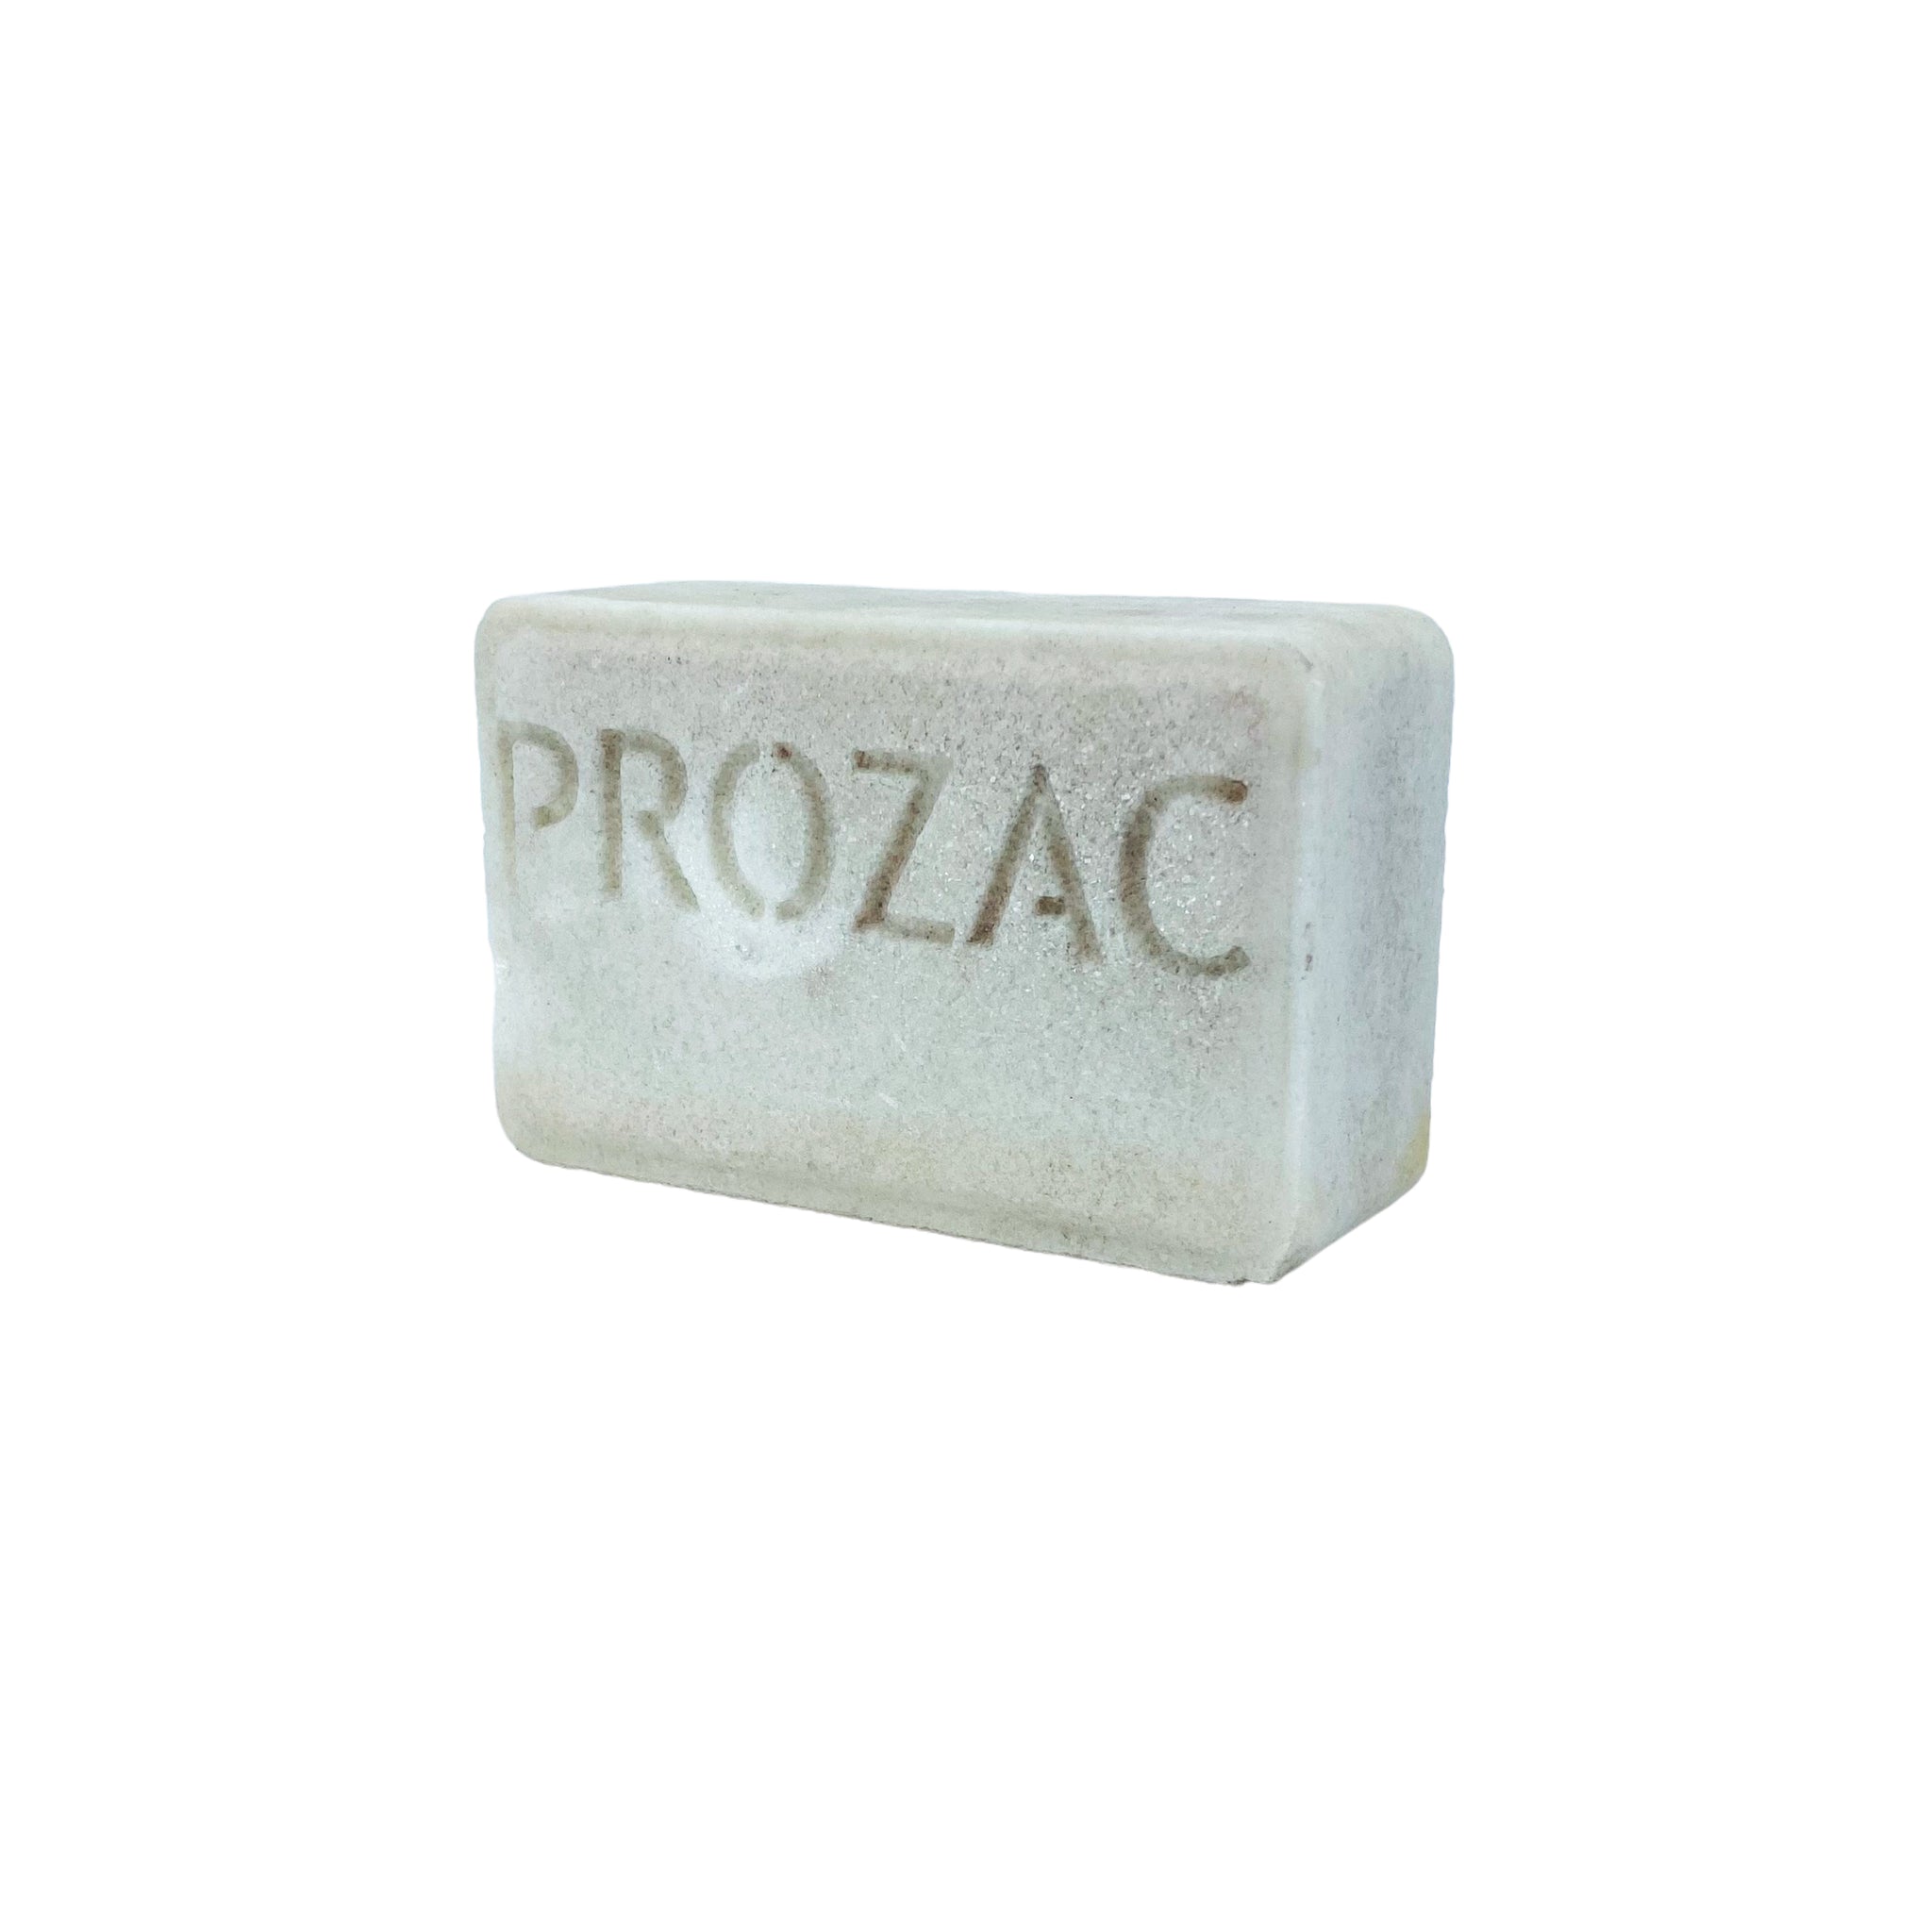 Vintage Promotional Prozac Paperweight